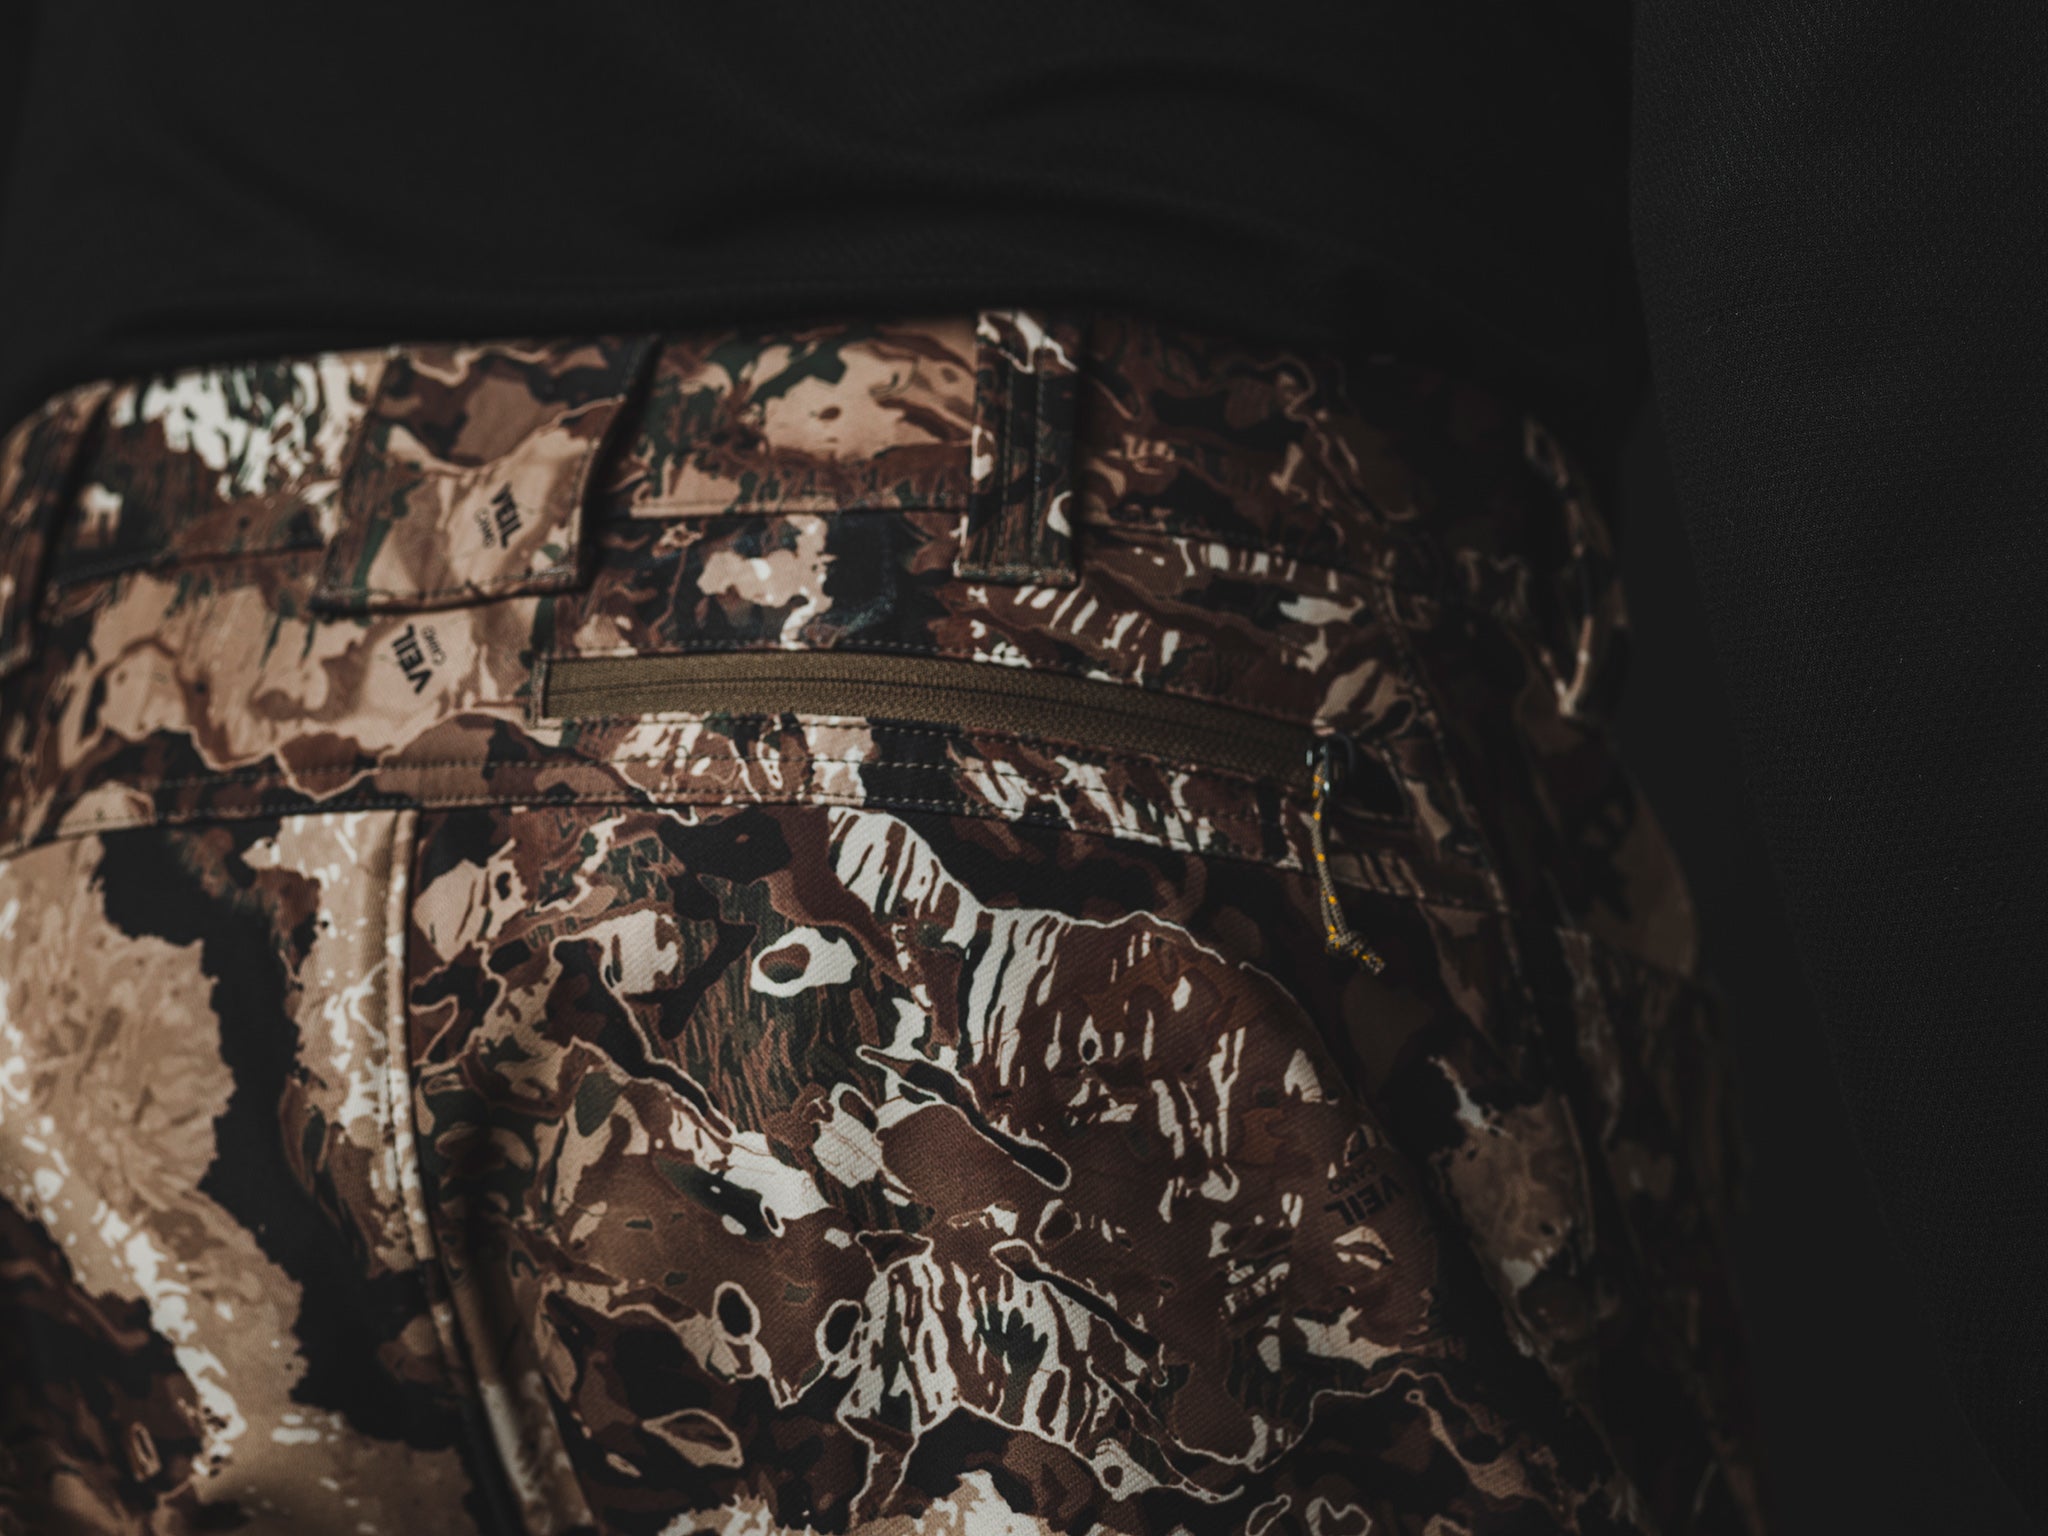 The Veil® Camo Field Pant is the most talked-about pant coming out for your next hunt. This multi-season, multi-purpose pant is comfortable and offers an athletic fit. With double weave 4-way stretch you can't go wrong with this pant!  PROTECTION Quick-drying, Windproof, Water Resistant. MATERIAL Exterior: 92% Polyester 8% Synthetic Fiber. FIT: Midweight and Multi-Season. CONDITIONS Mild, Dry, Cold, Wet, Wind. PATTERN Veil® Camo in Grind.Multi-Season Gear & Pursuits